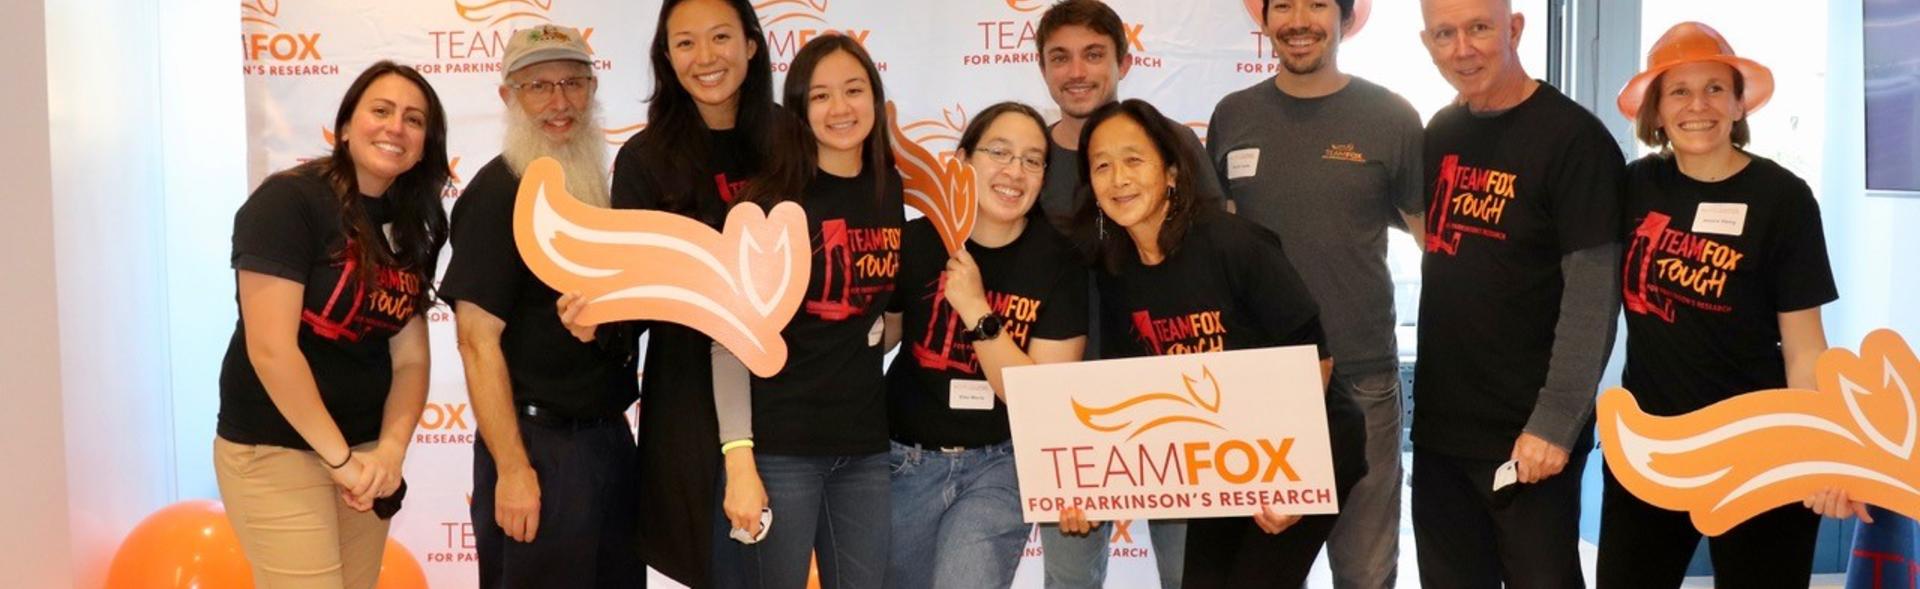 A group smiling with Team Fox signs & our fox logo.